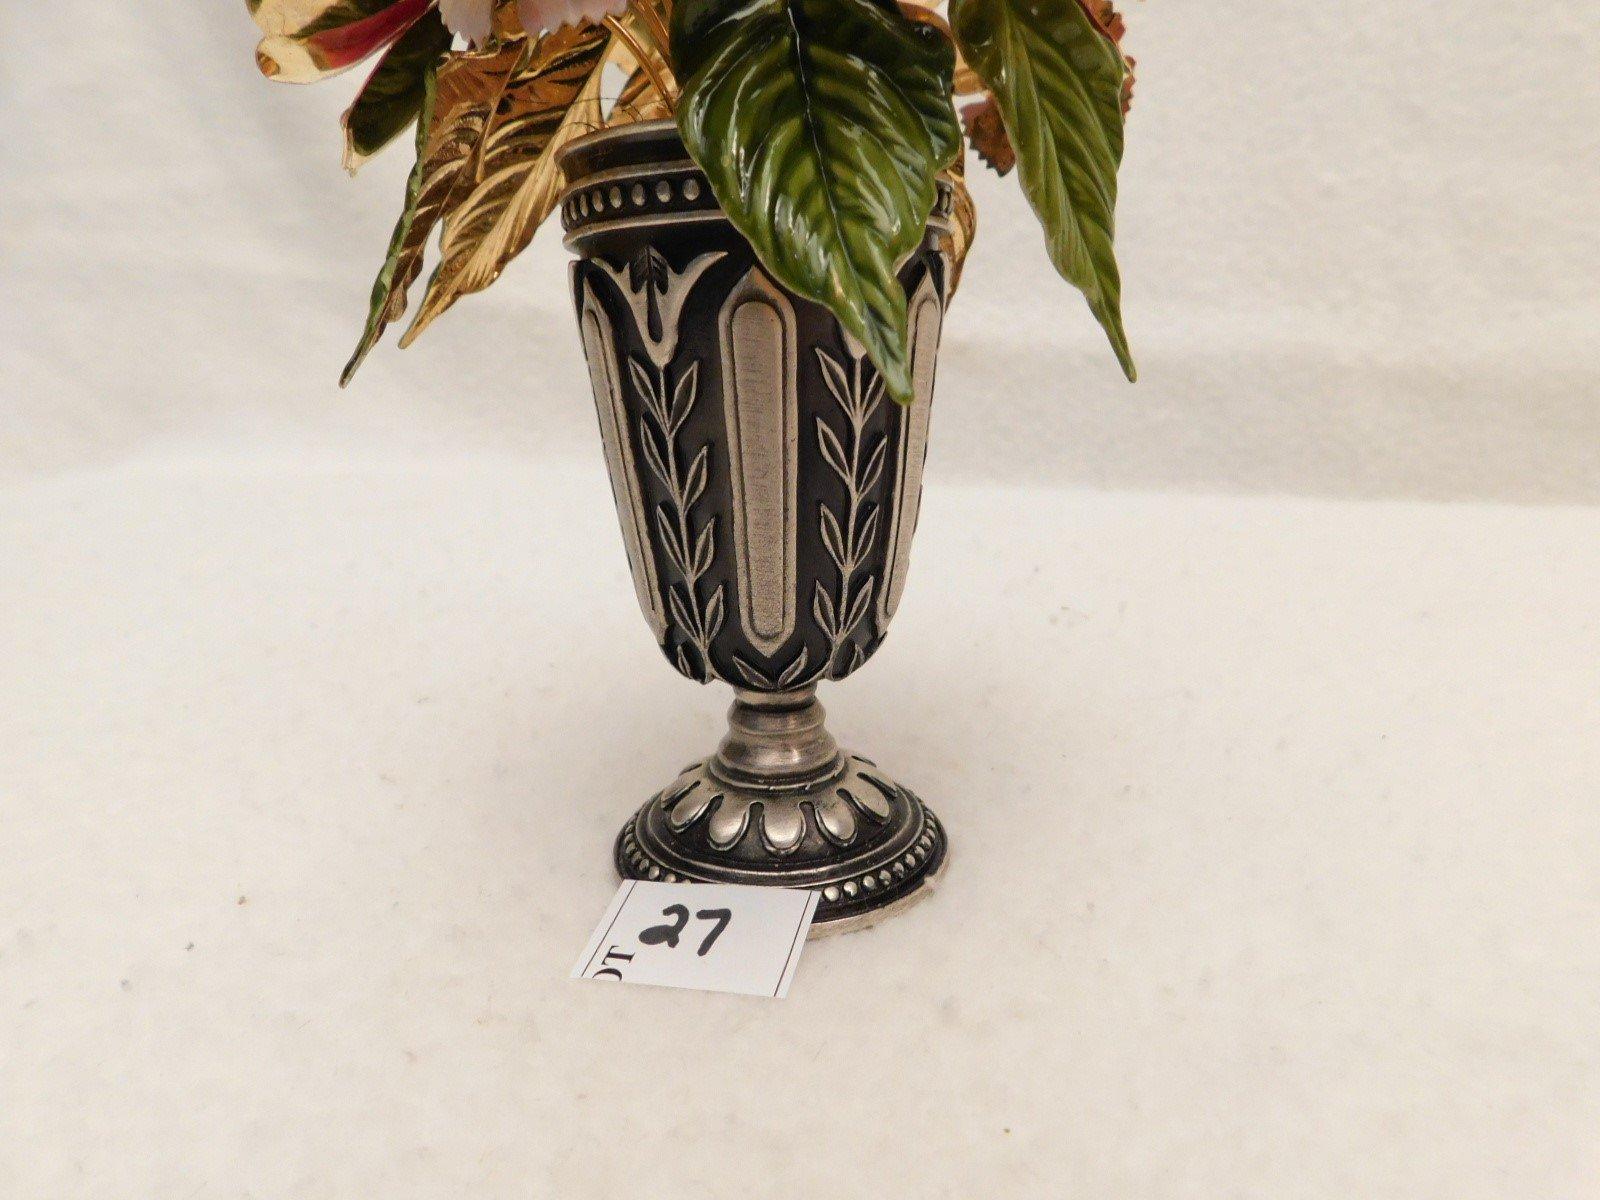 URN, FABERGE, "THE ROYAL BRITISH BOUQUET," PURE SILVER PLATE, ENAMEL FLORAL